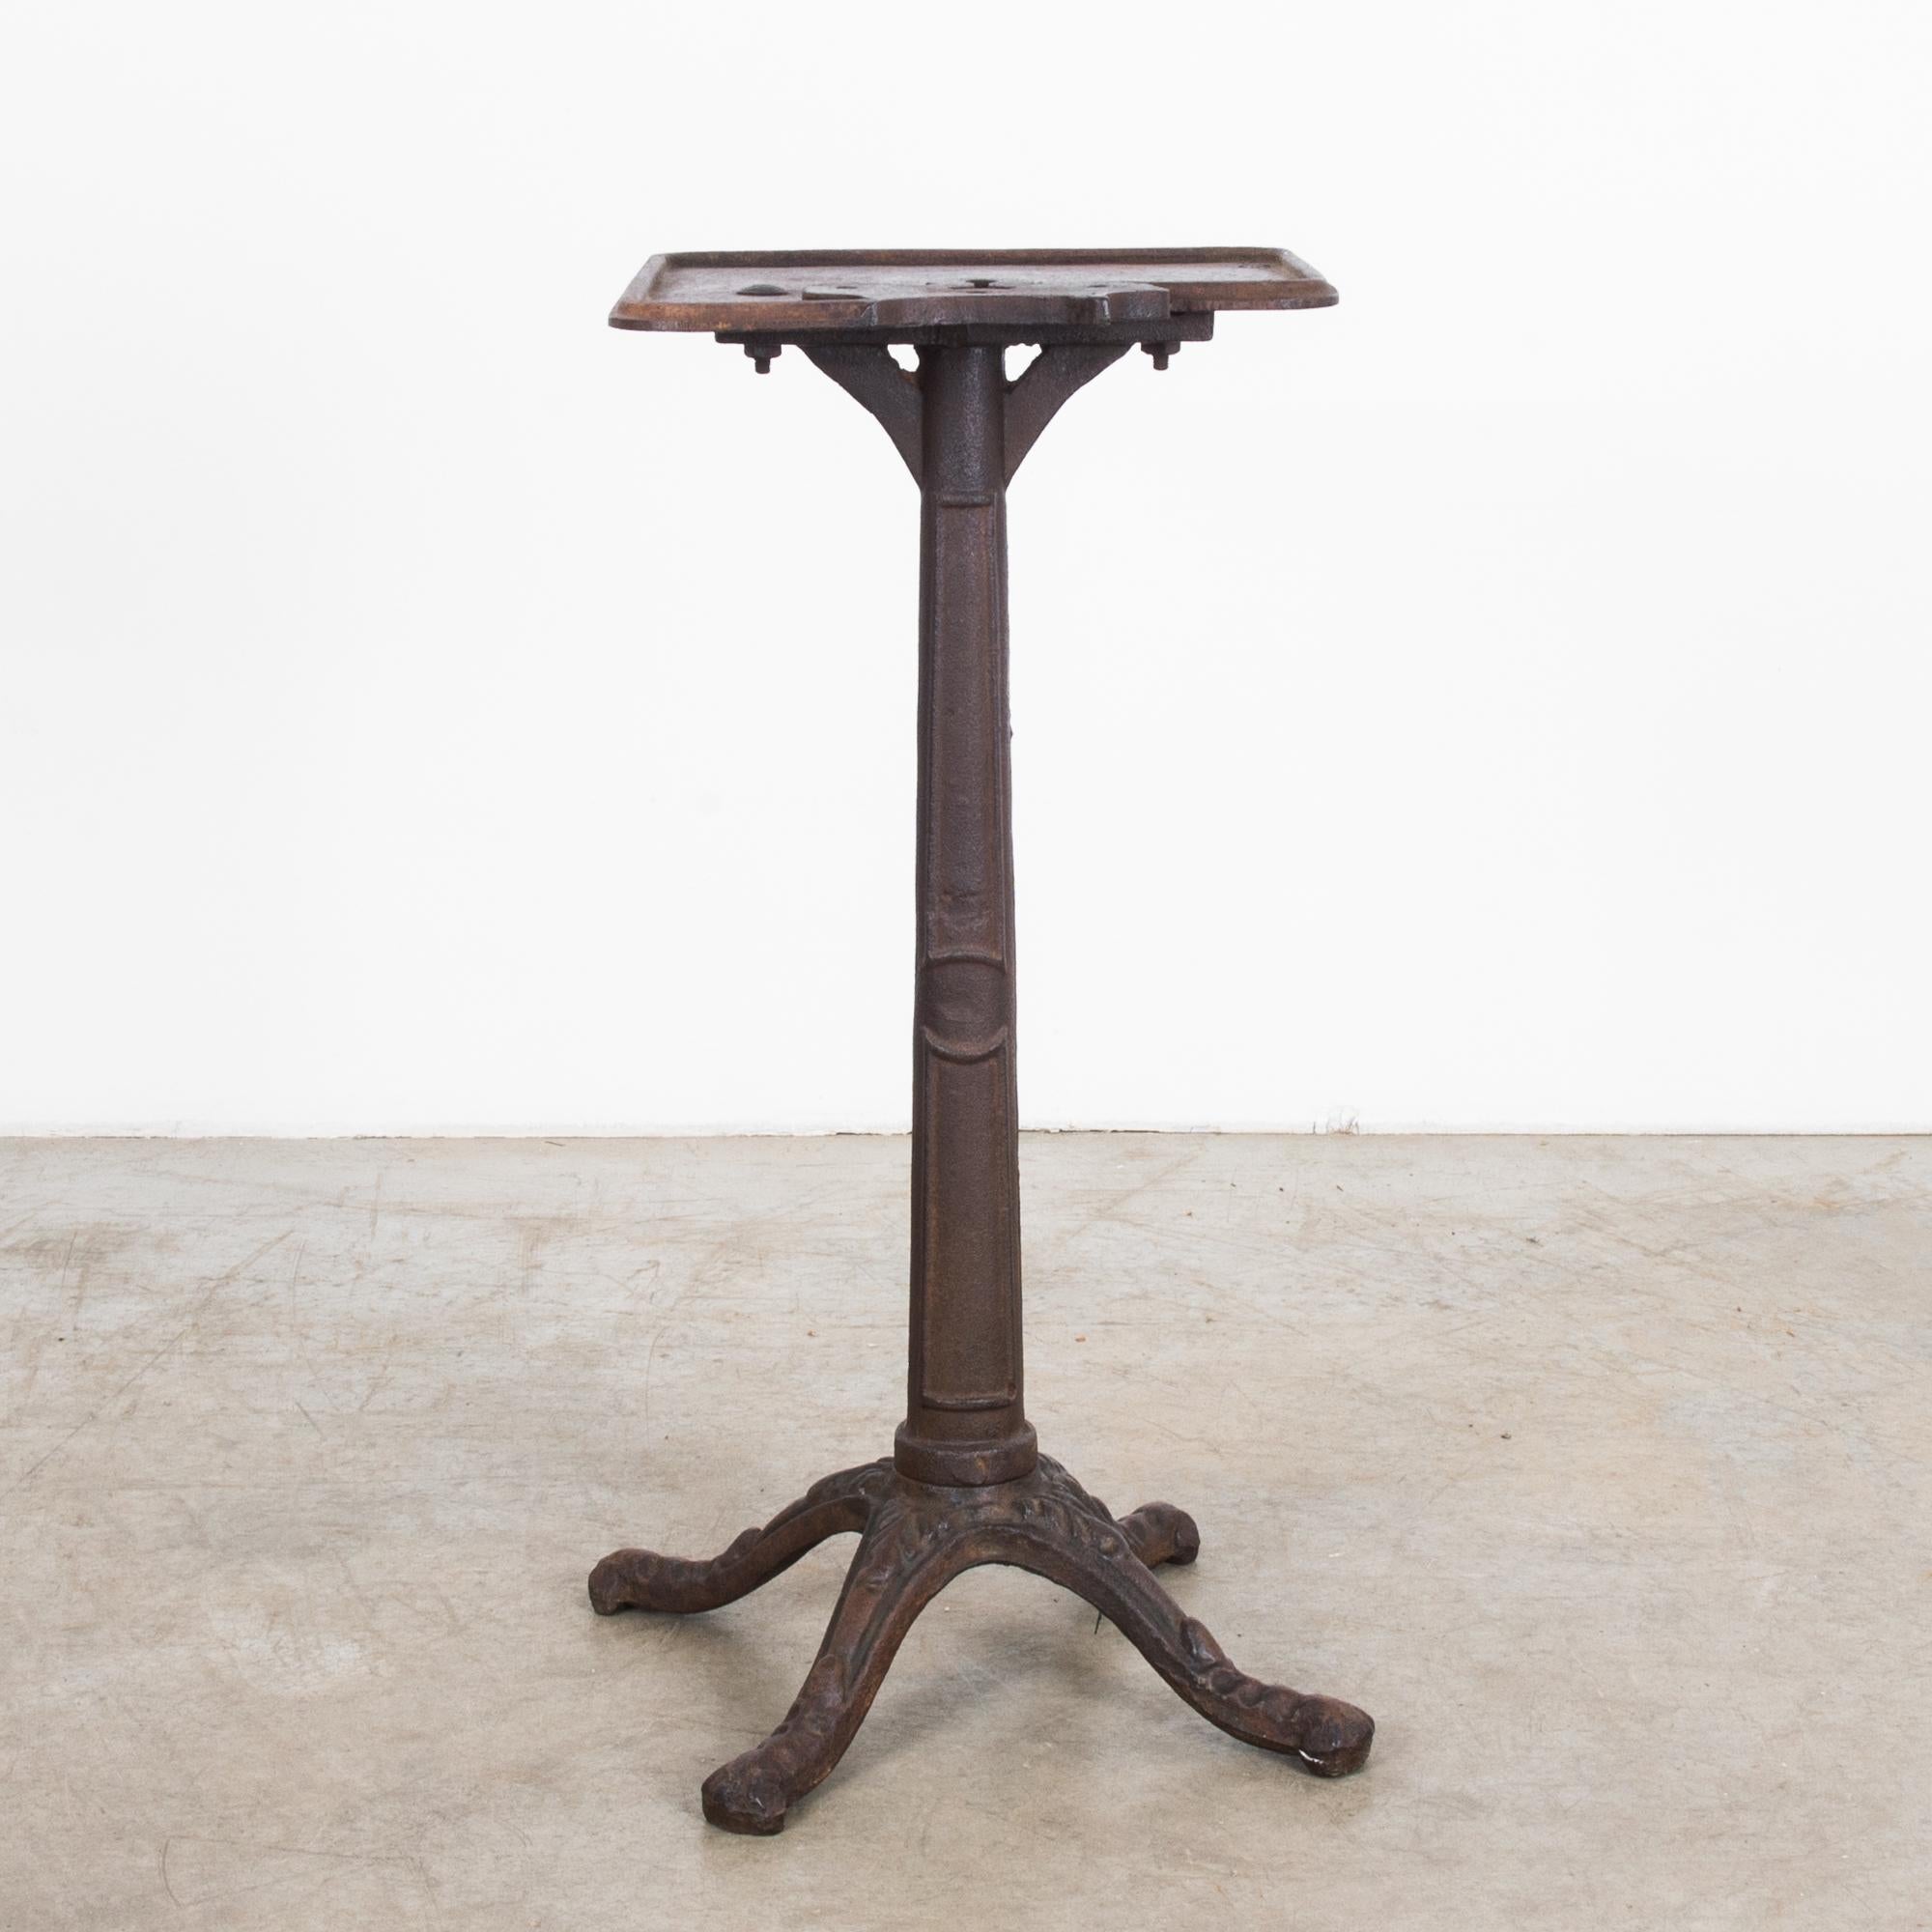 This antique cast iron work table impresses with its timeworn patina. Made in France, timeworn oxidized solidity, is accented with charming details. Floral ornament embellishes the legs of the quadripod stand, while a crown playfully interrupts the